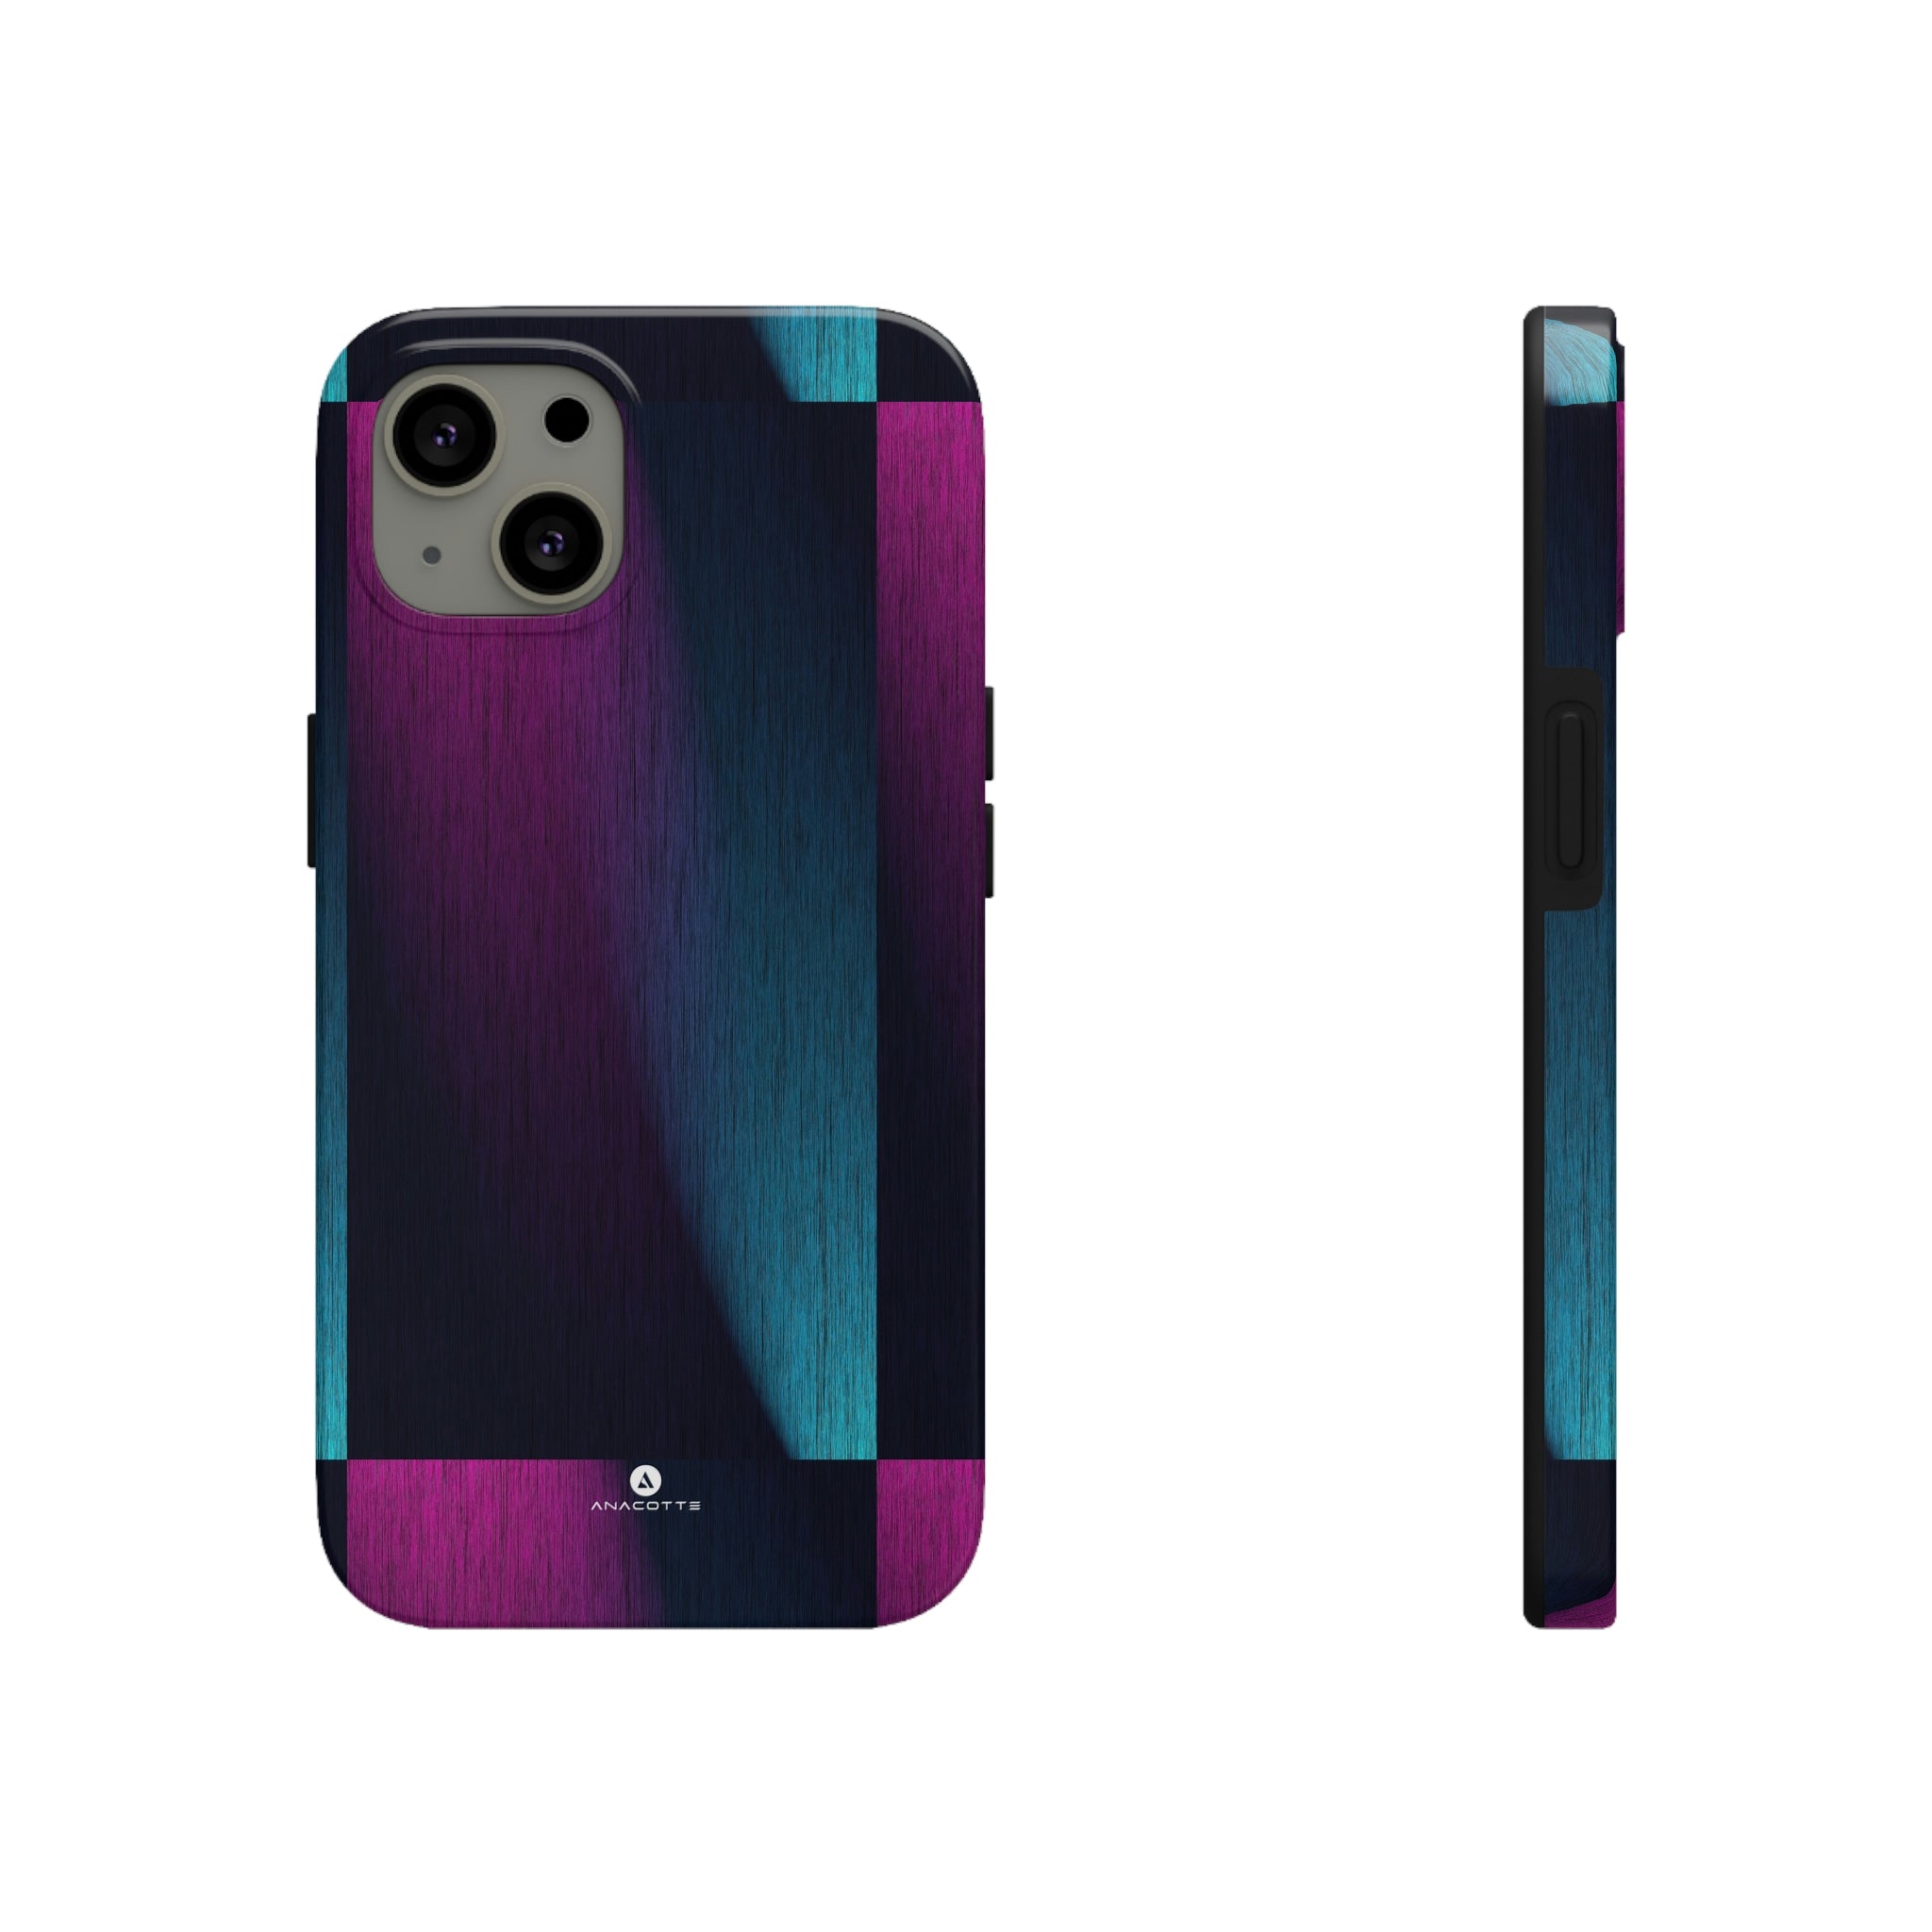 Anacotte Radiant Ultra-Slim Protective Phone Case with Vibrant Colors